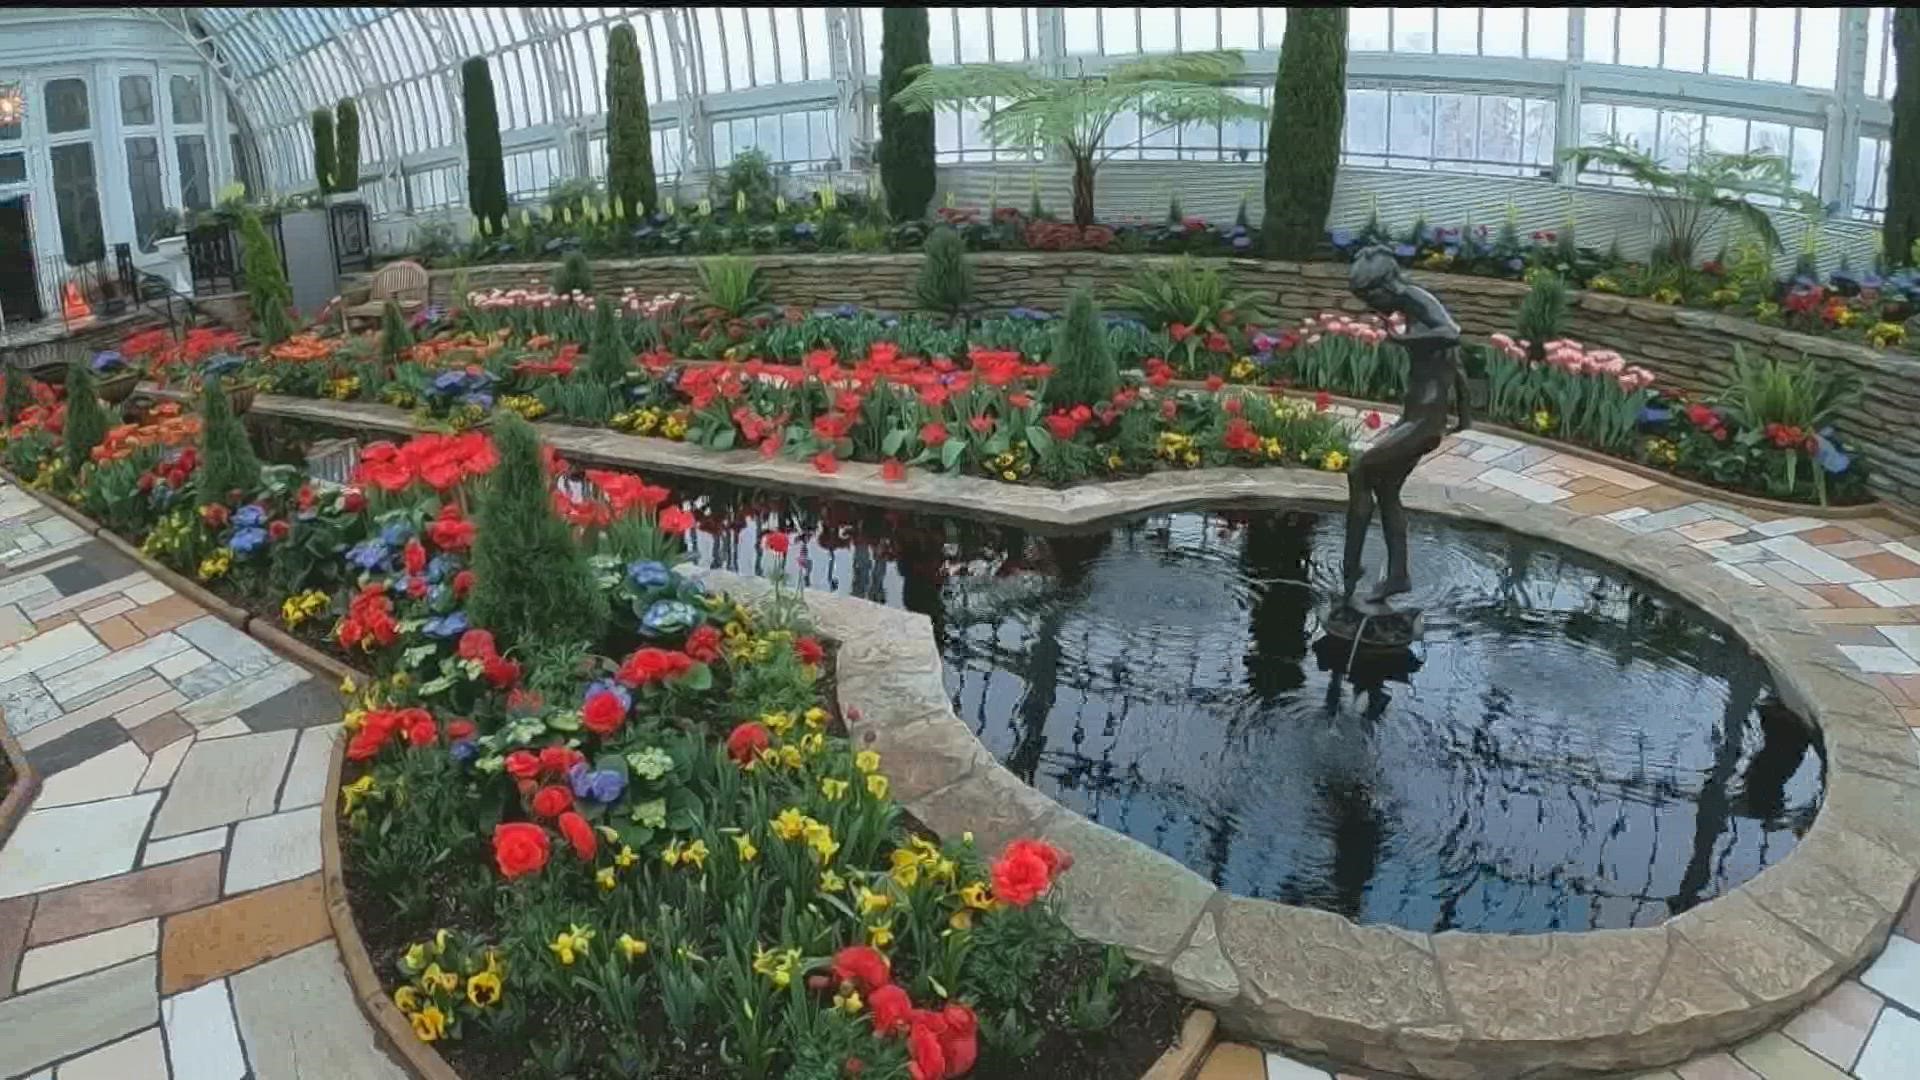 Como Park Horticulturalist Ariel Dressler joined KARE 11 Saturday to discuss what people can expect from this year's flower show.